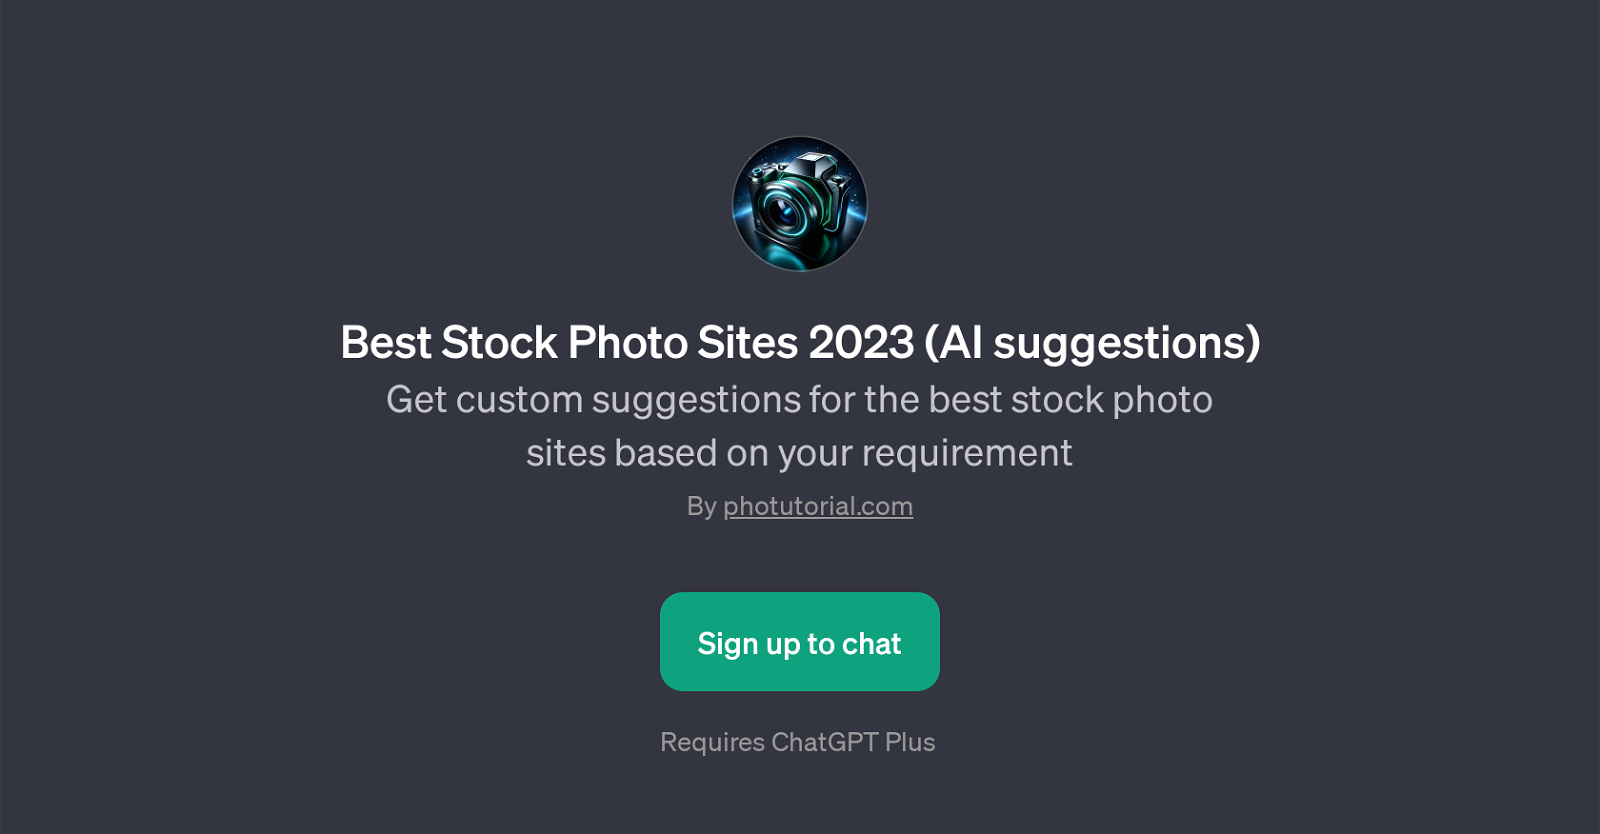 Best Stock Photo Sites 2023 (AI suggestions) website